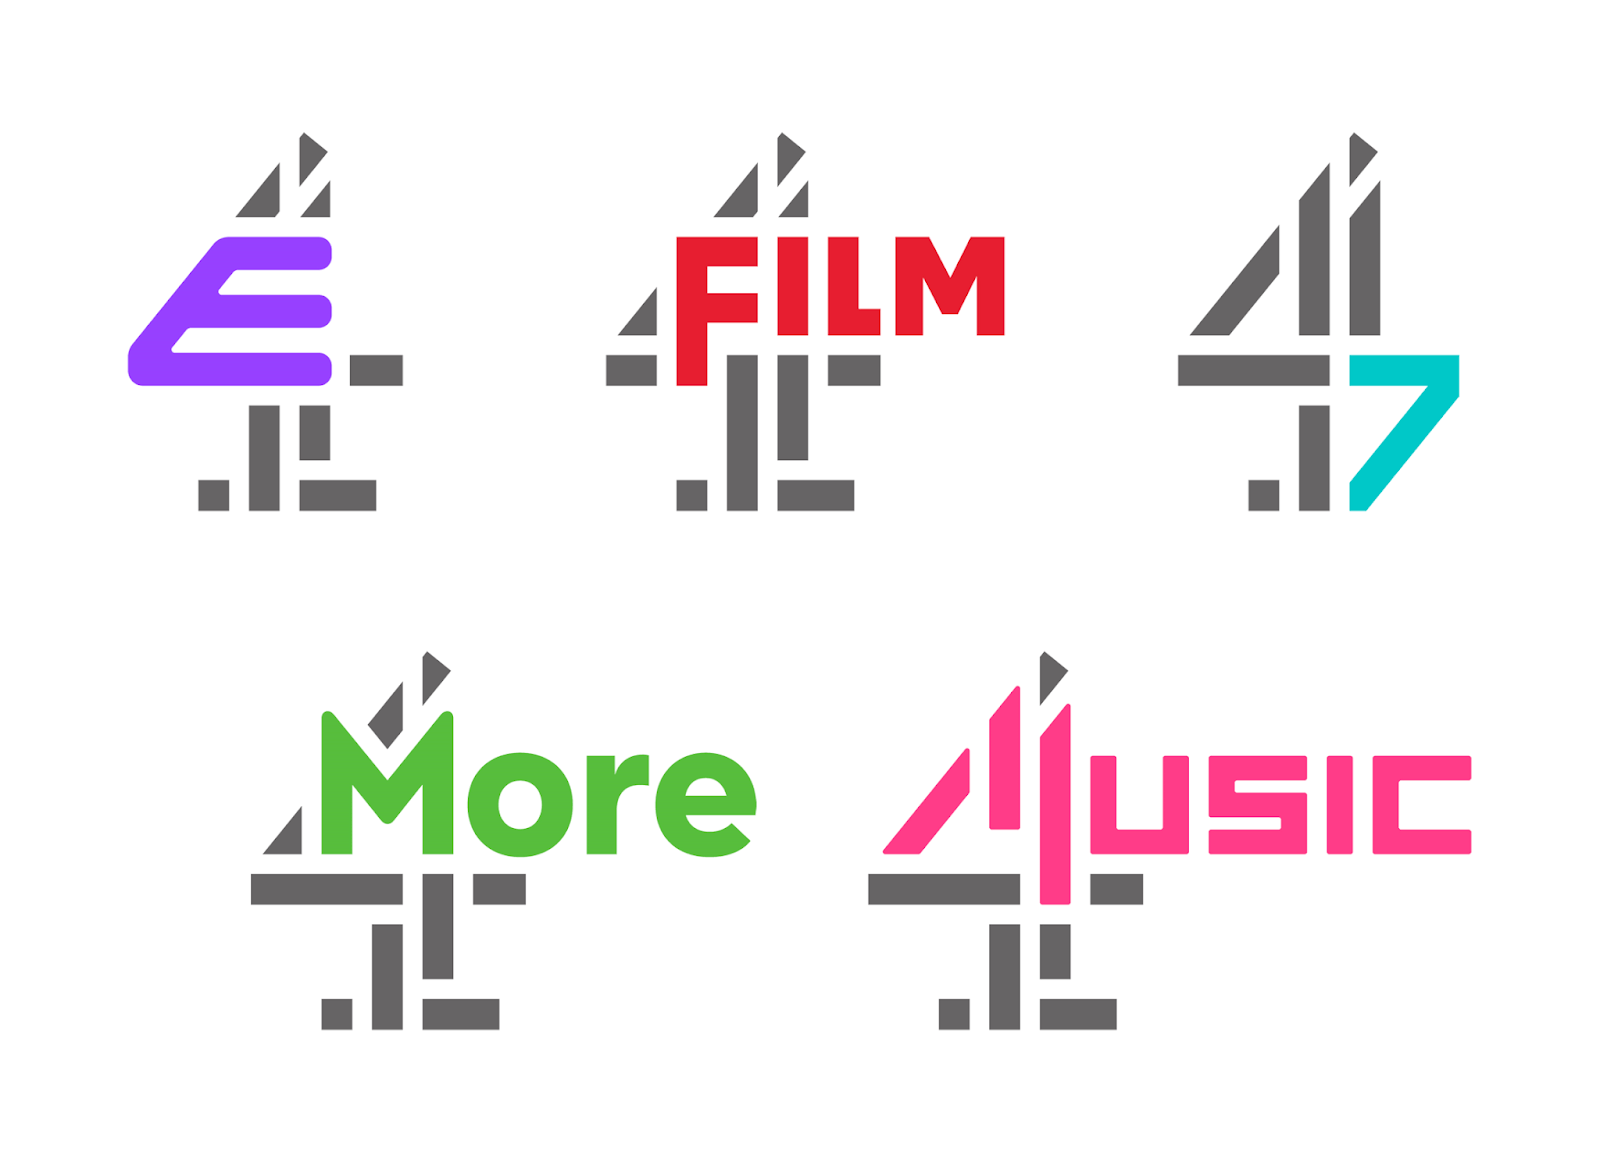 E4 Logo - The Branding Source: Unified logos for Channel 4 thematic channels